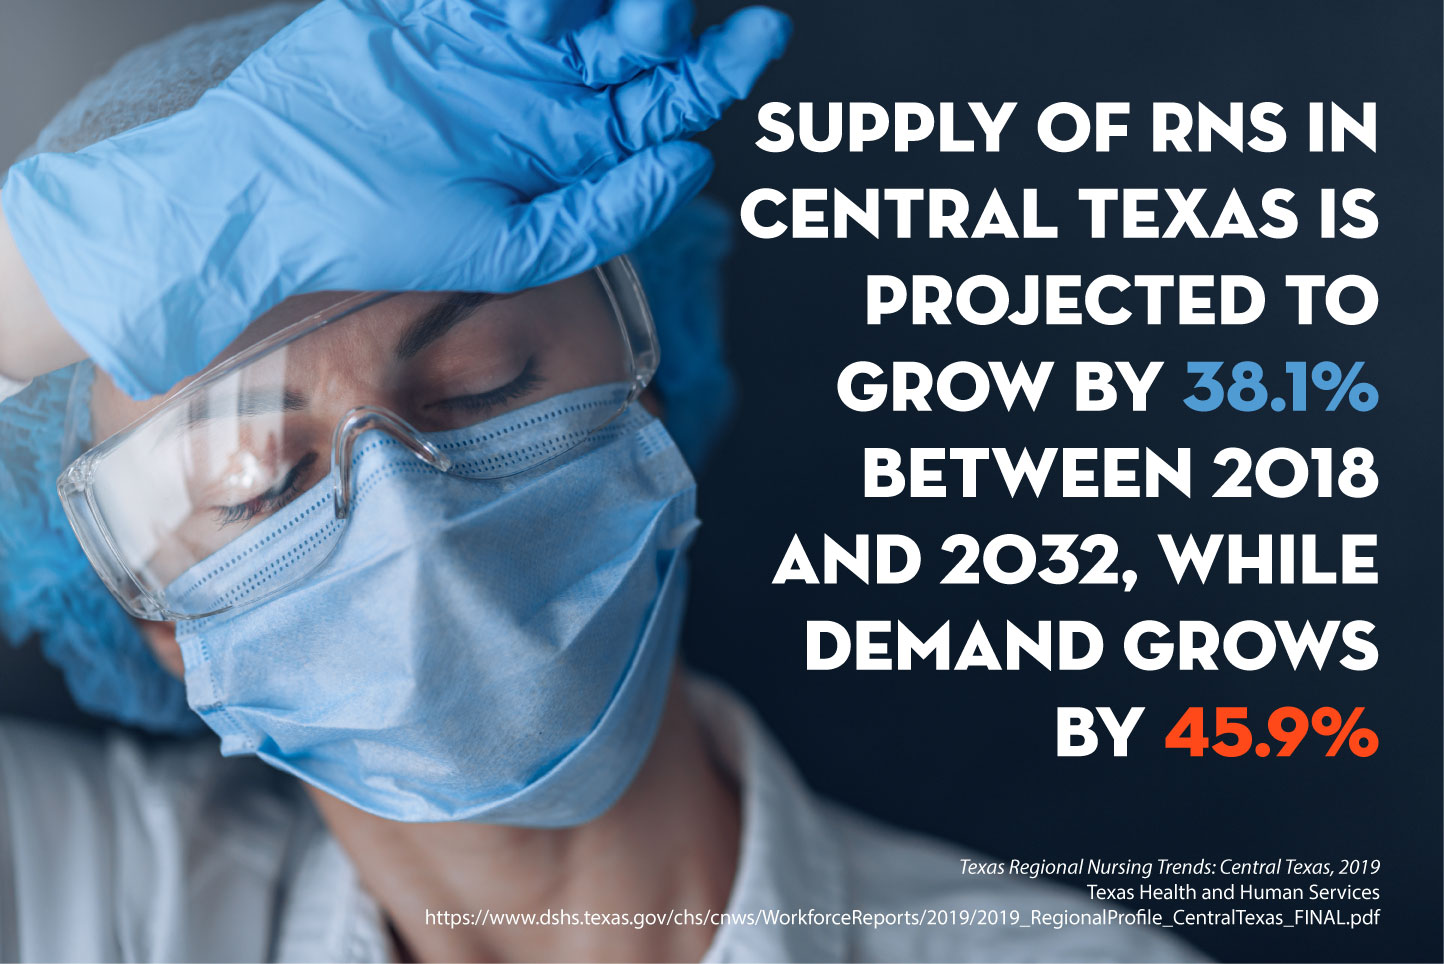 Stat: Supply of RNs in Central Texas is projected to grow by 38.1% between 2018 and 2032, while demand grows by 45.9%. source: Texas Regional Nursing Trends by Texas Health and Human Services.